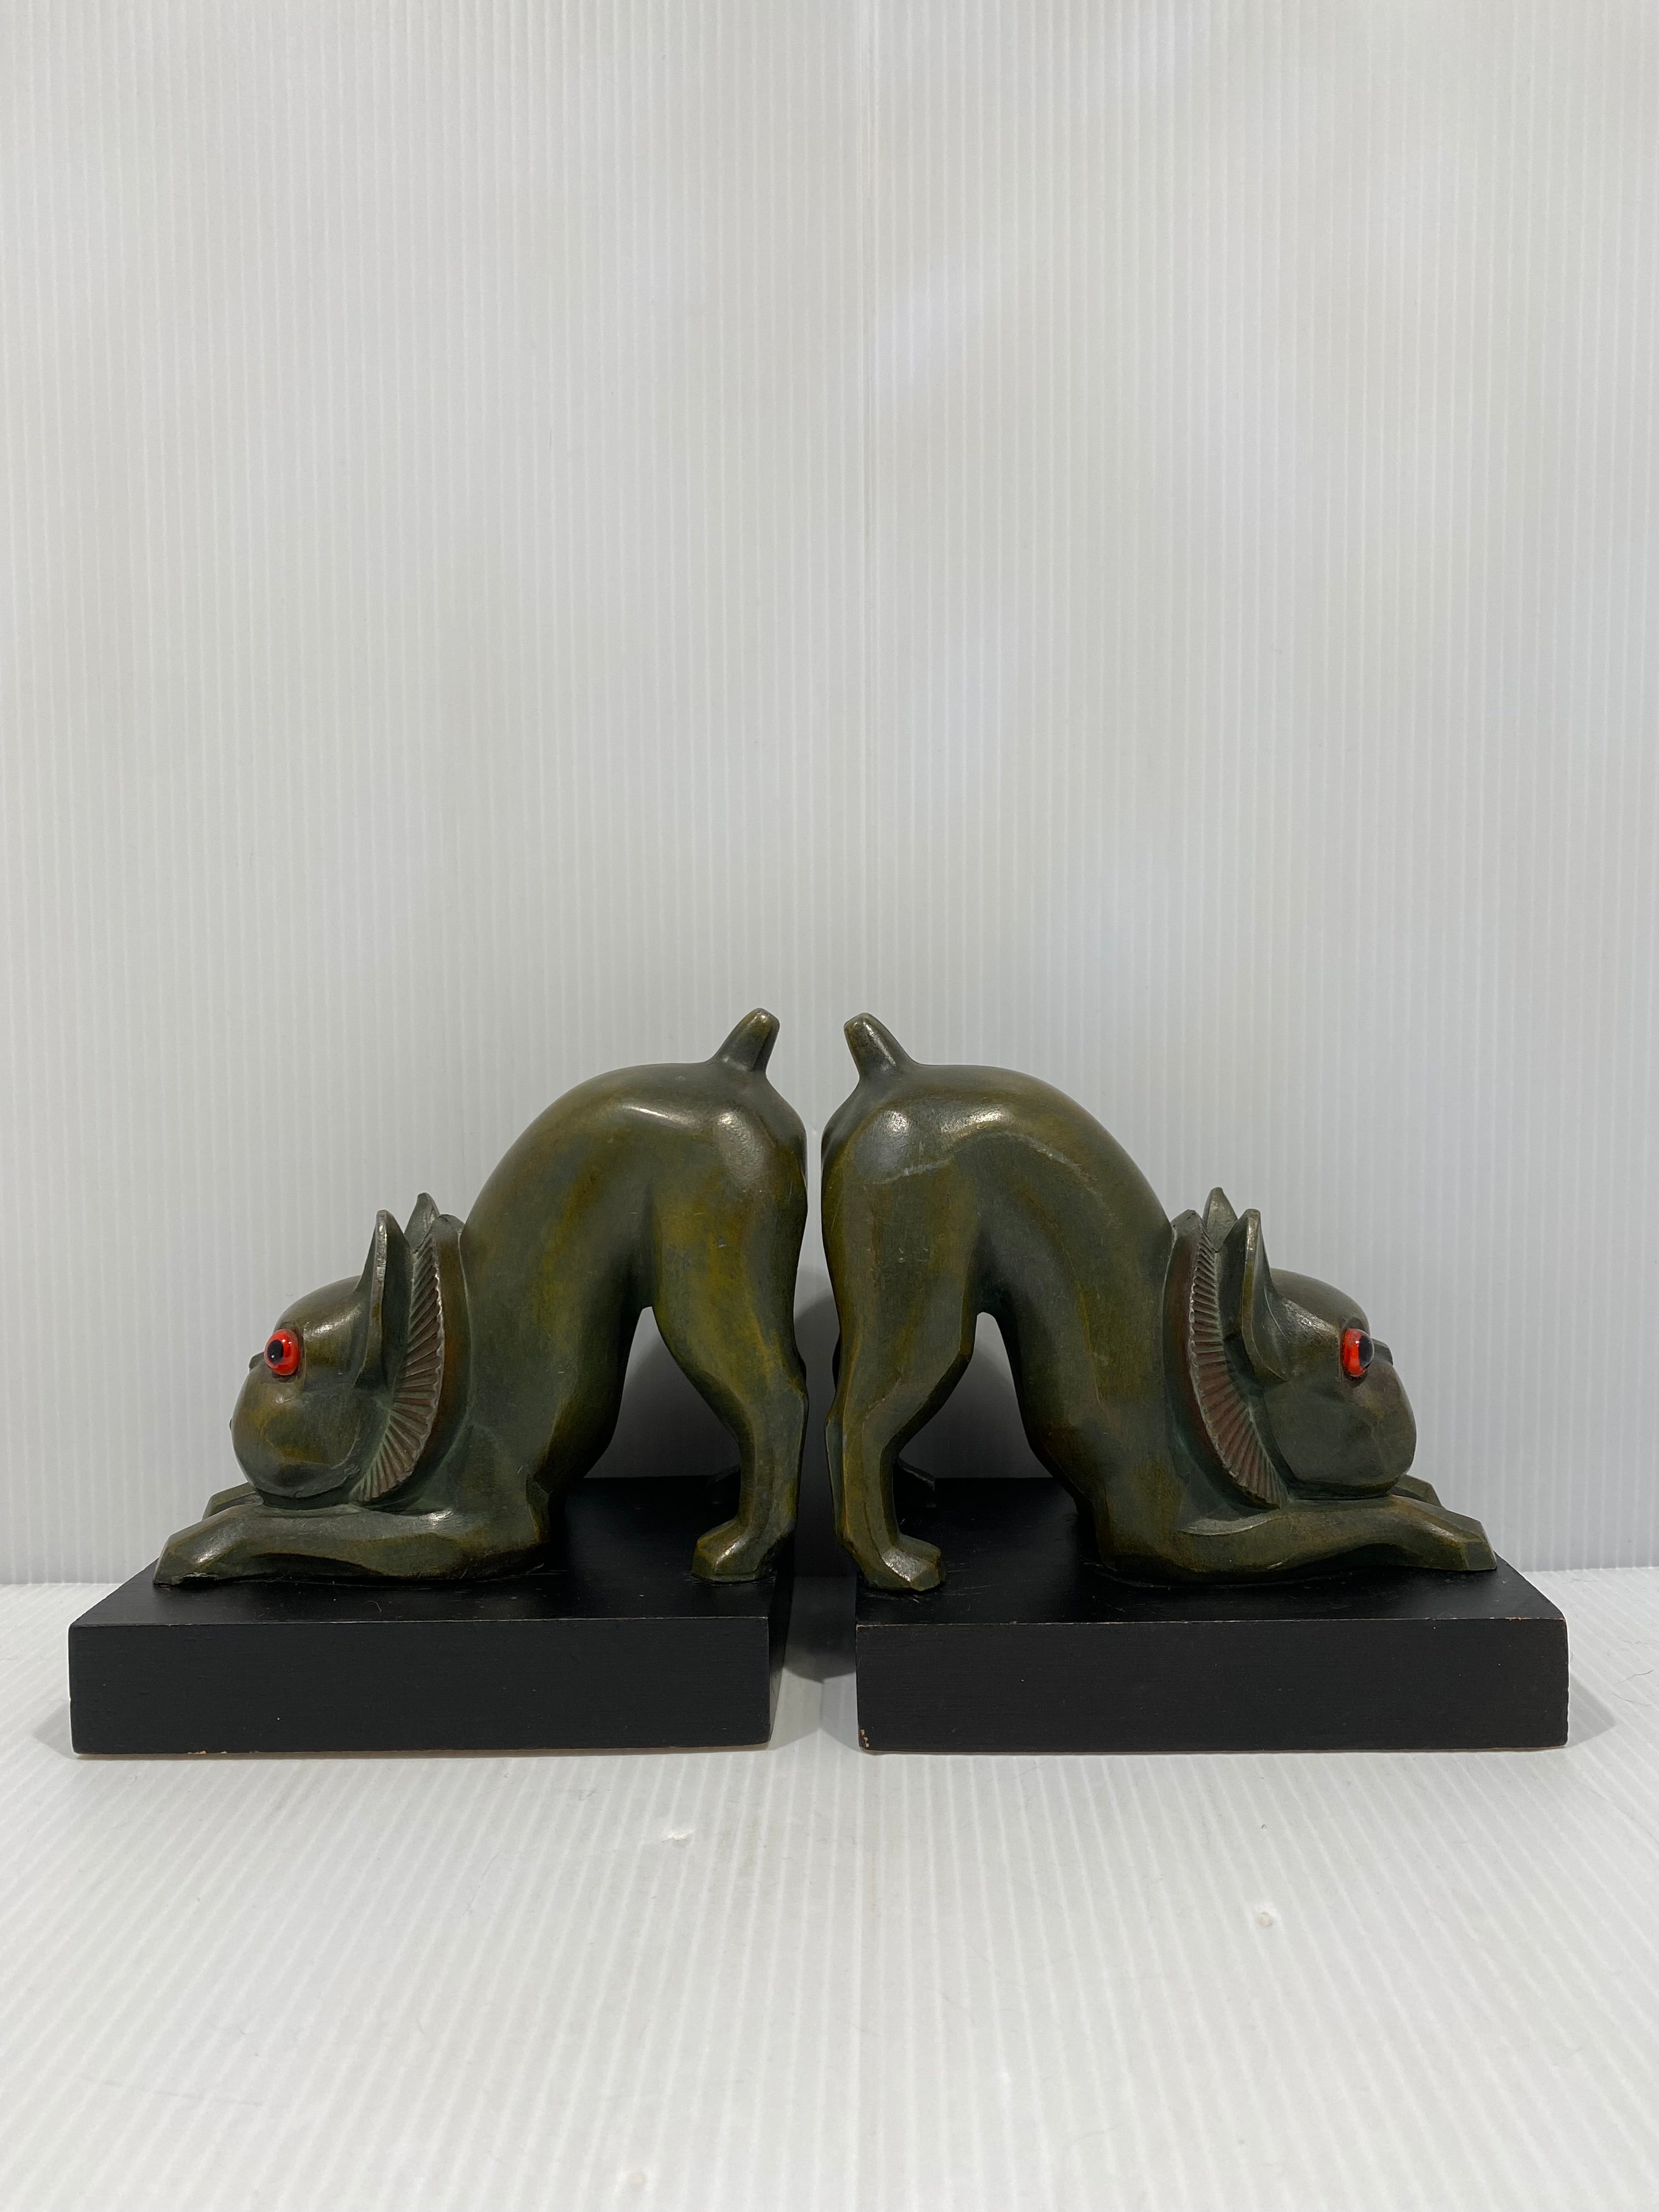 ART DECO FRENCH BULLDOG METAL BOOKENDS